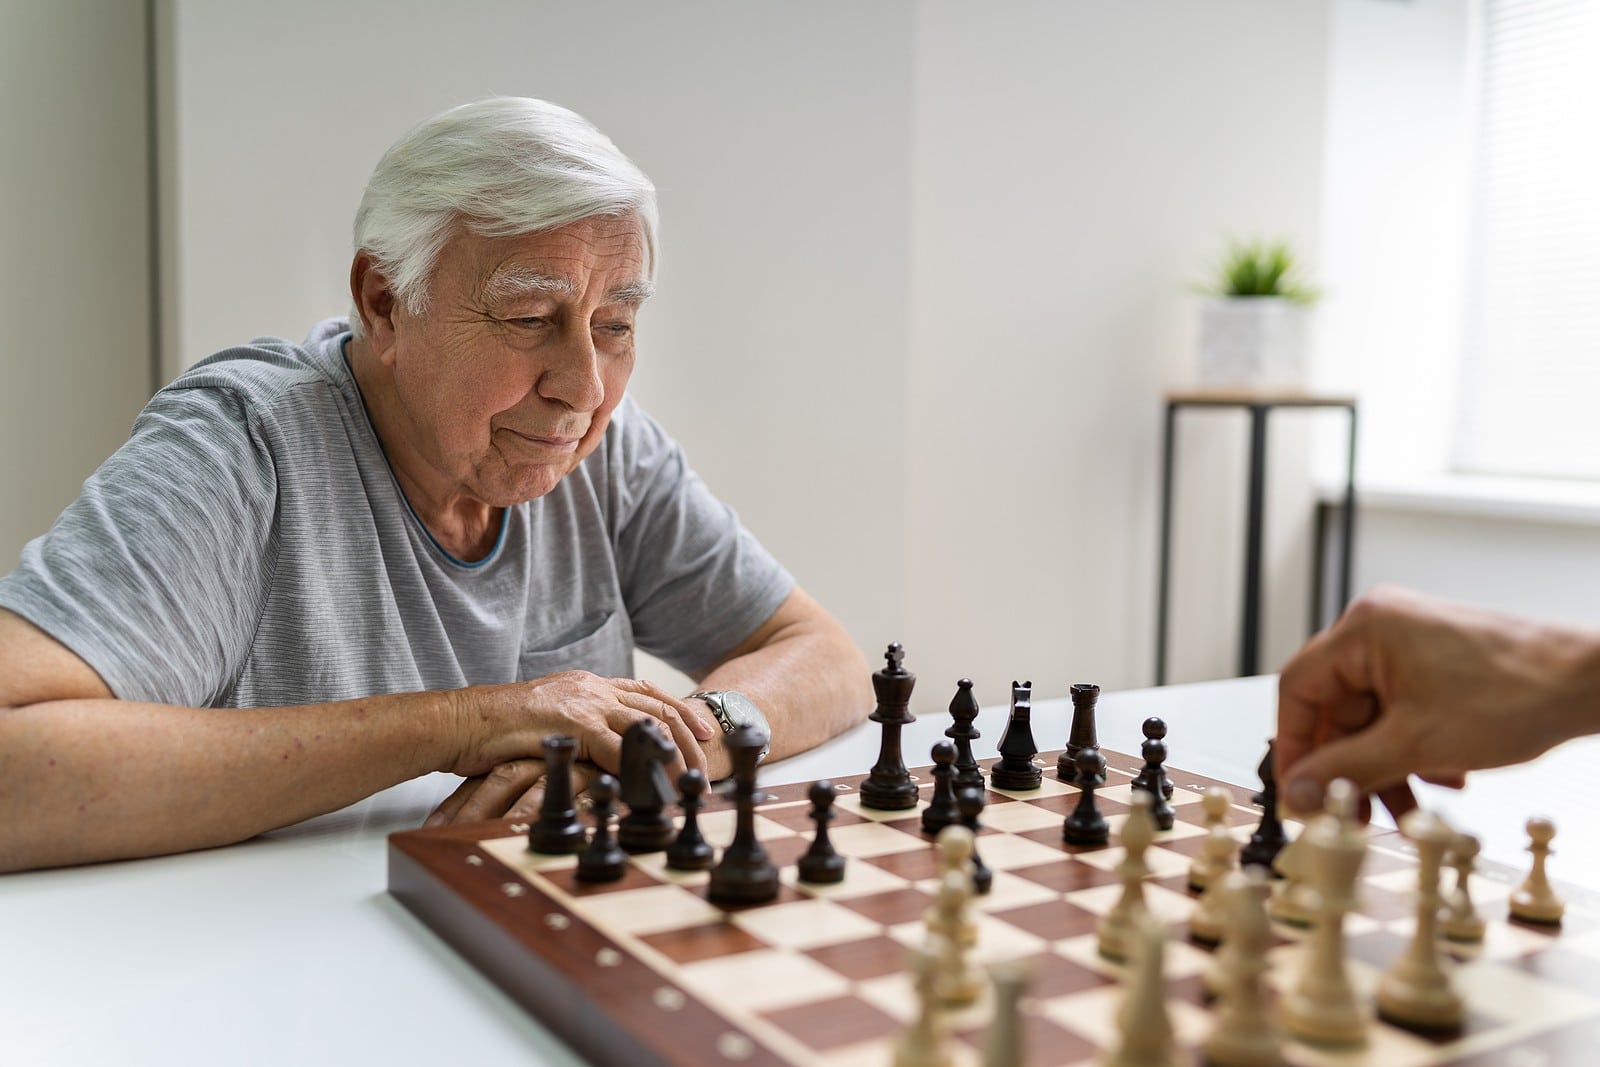 Seniors playing chess as a brain exercise